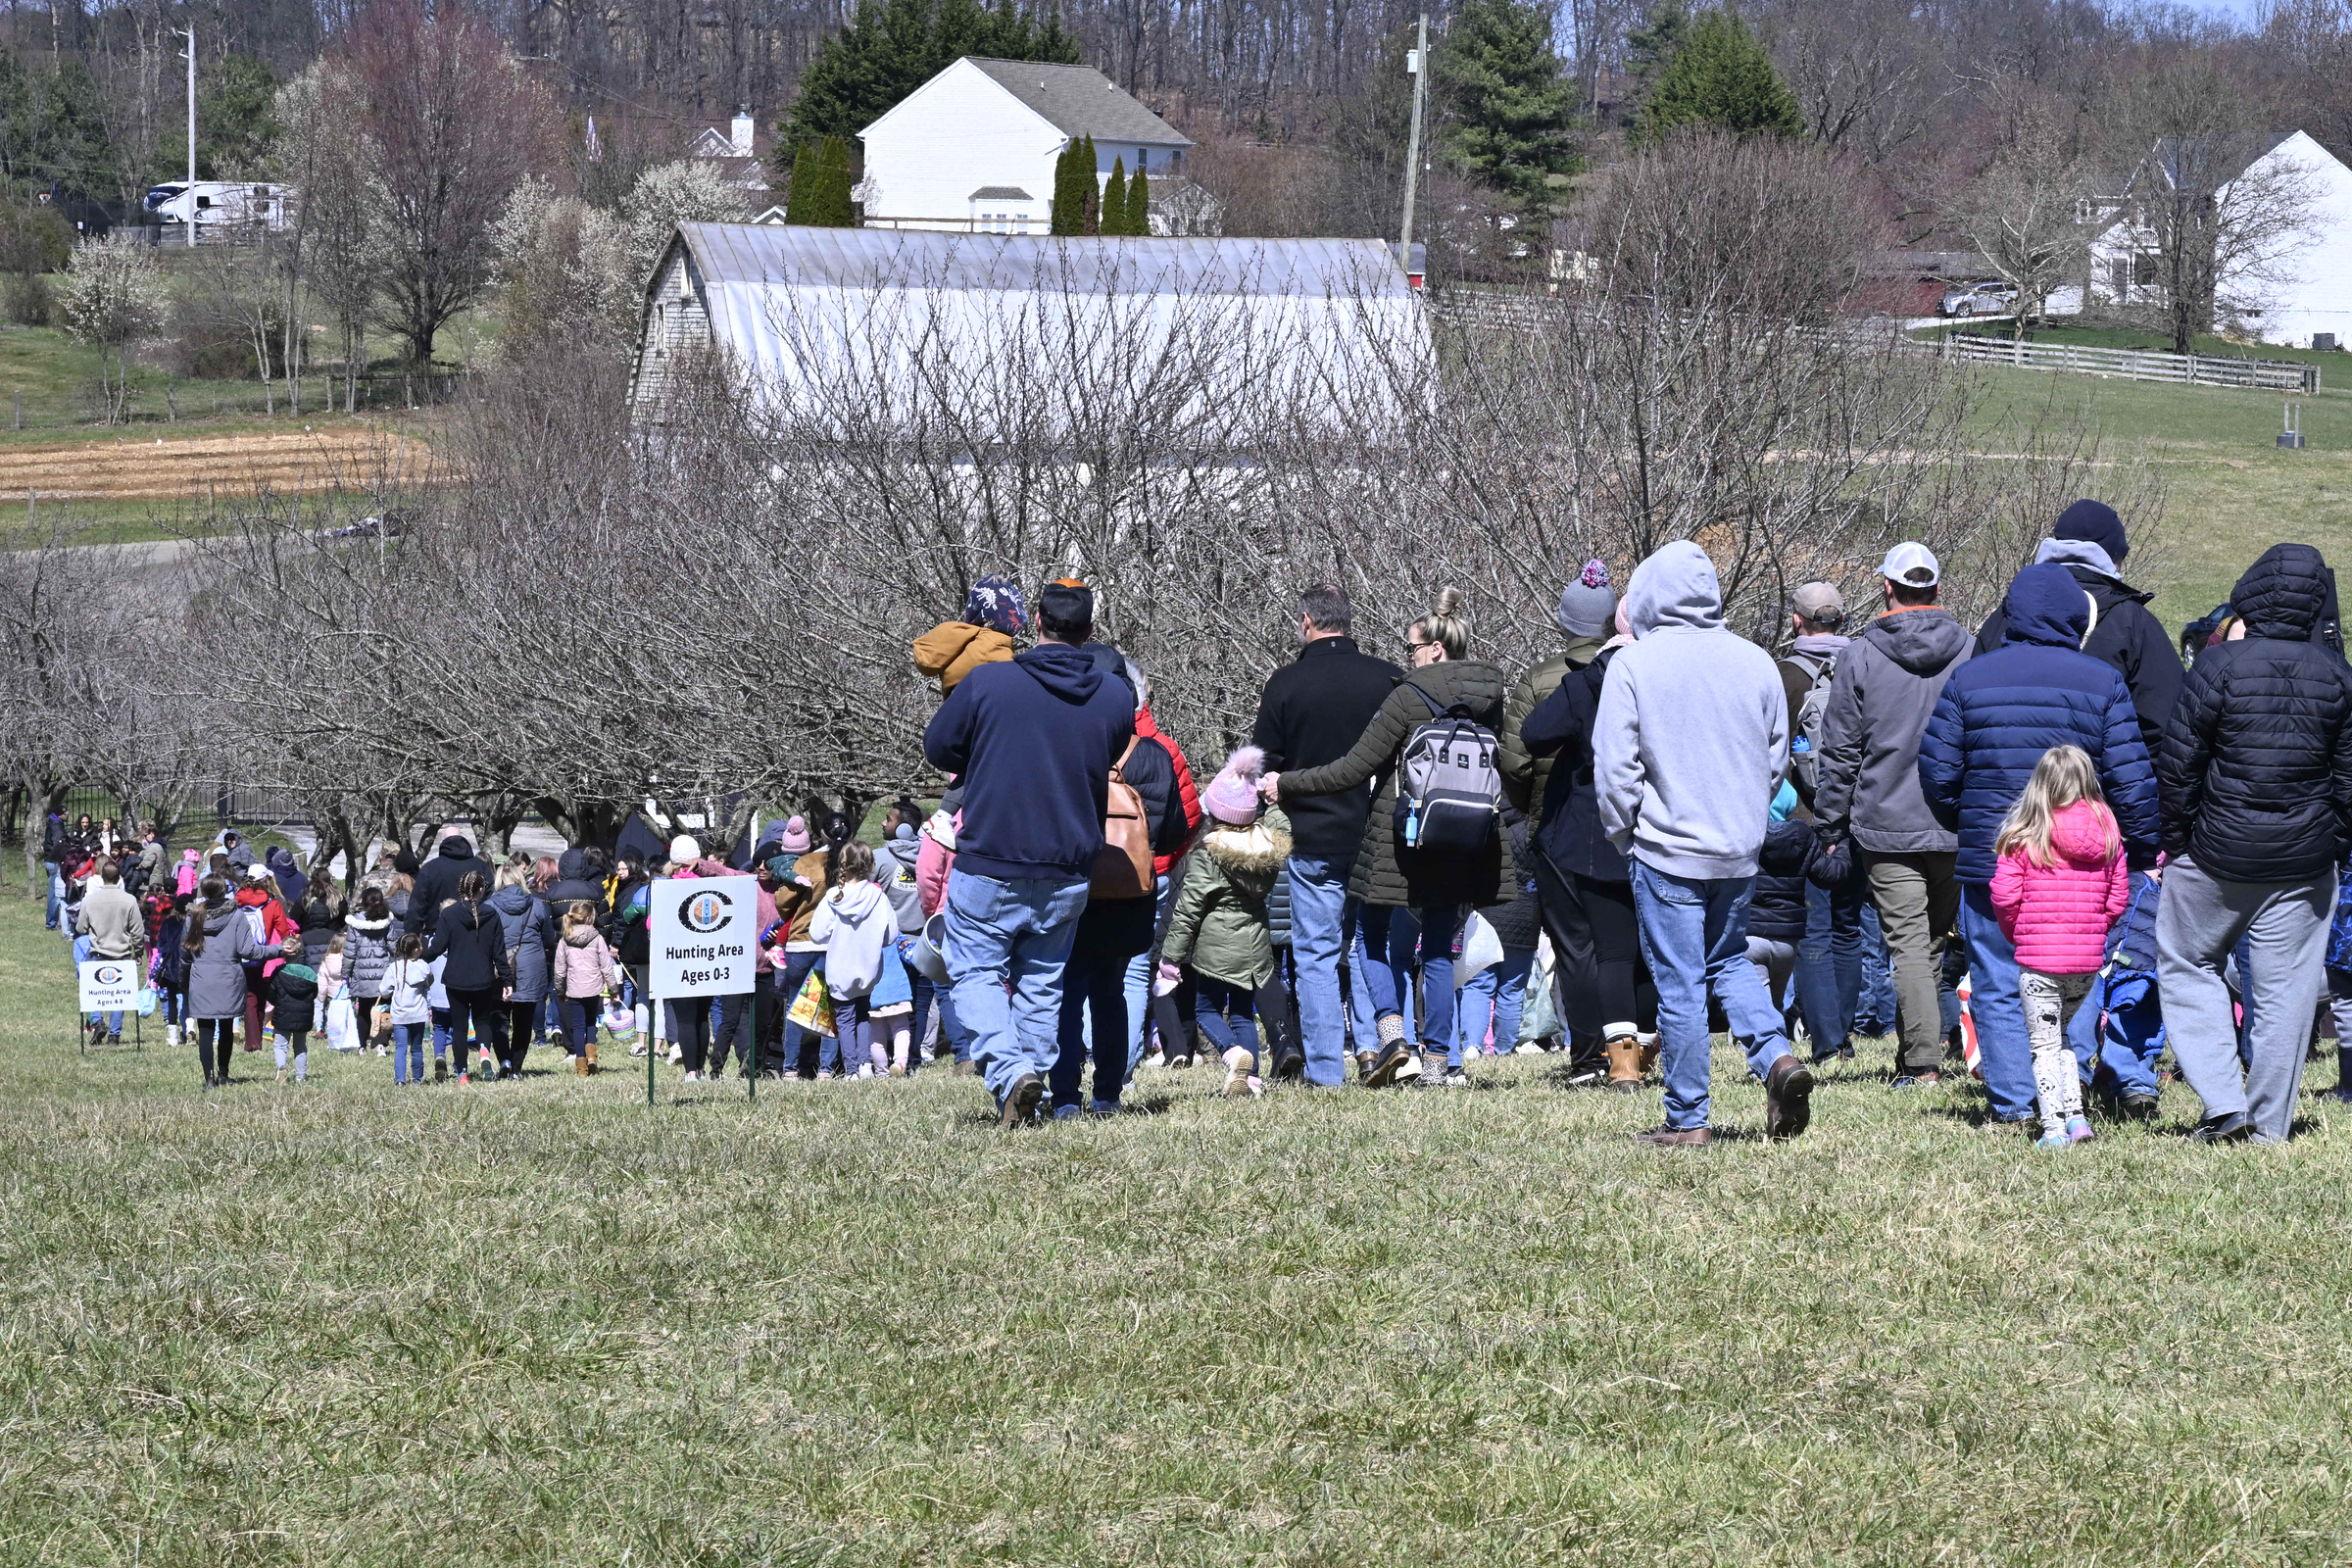 Families walk to the starting area before the Easter egg hunt during the Coppermine Eggstravaganza at Cascade Park in Hampstead. (Thomas Walker/Freelance)